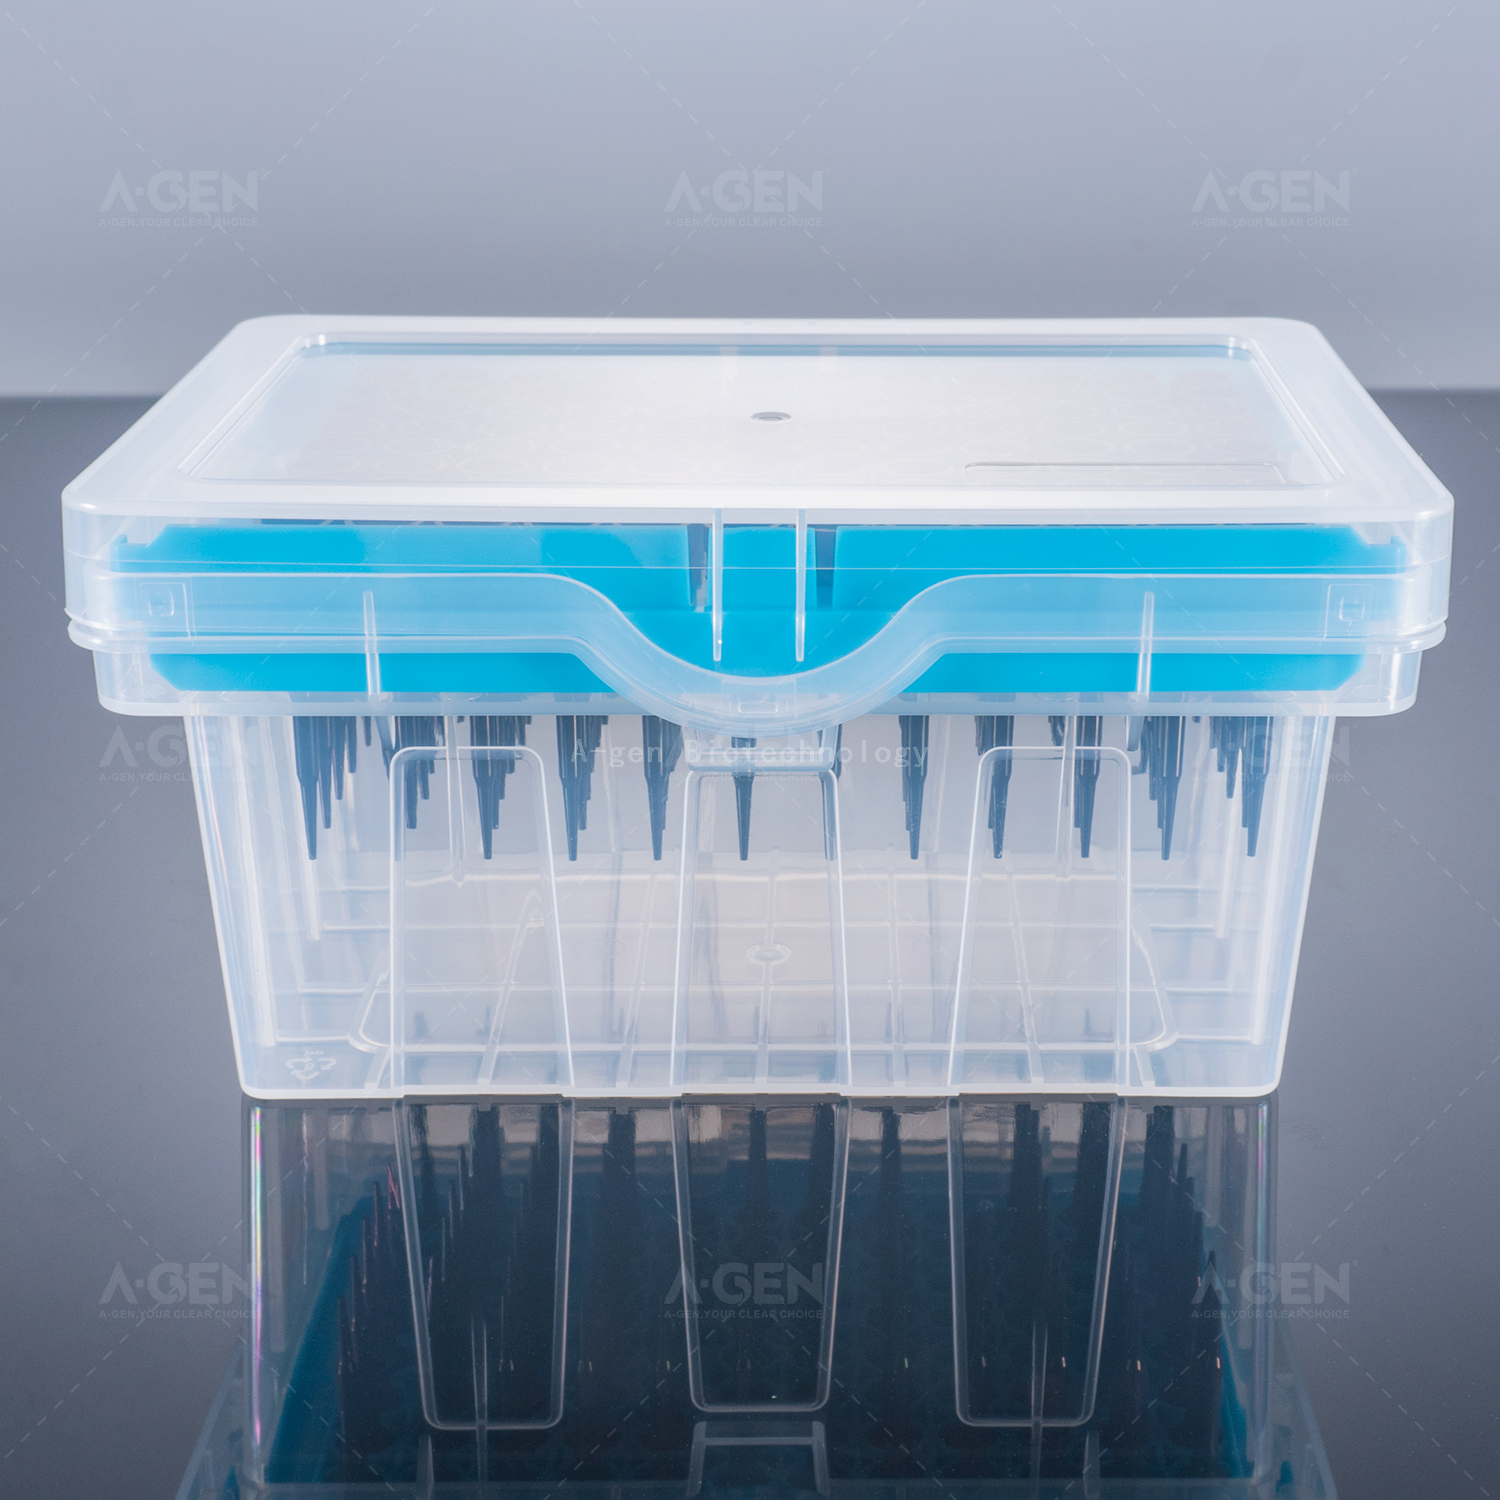 Tecan LiHa 20μL Conductive PP Pipette Tip (Racked,sterilized) for Liquid Transfer With Filter TTF-20C-RSL Low Residual